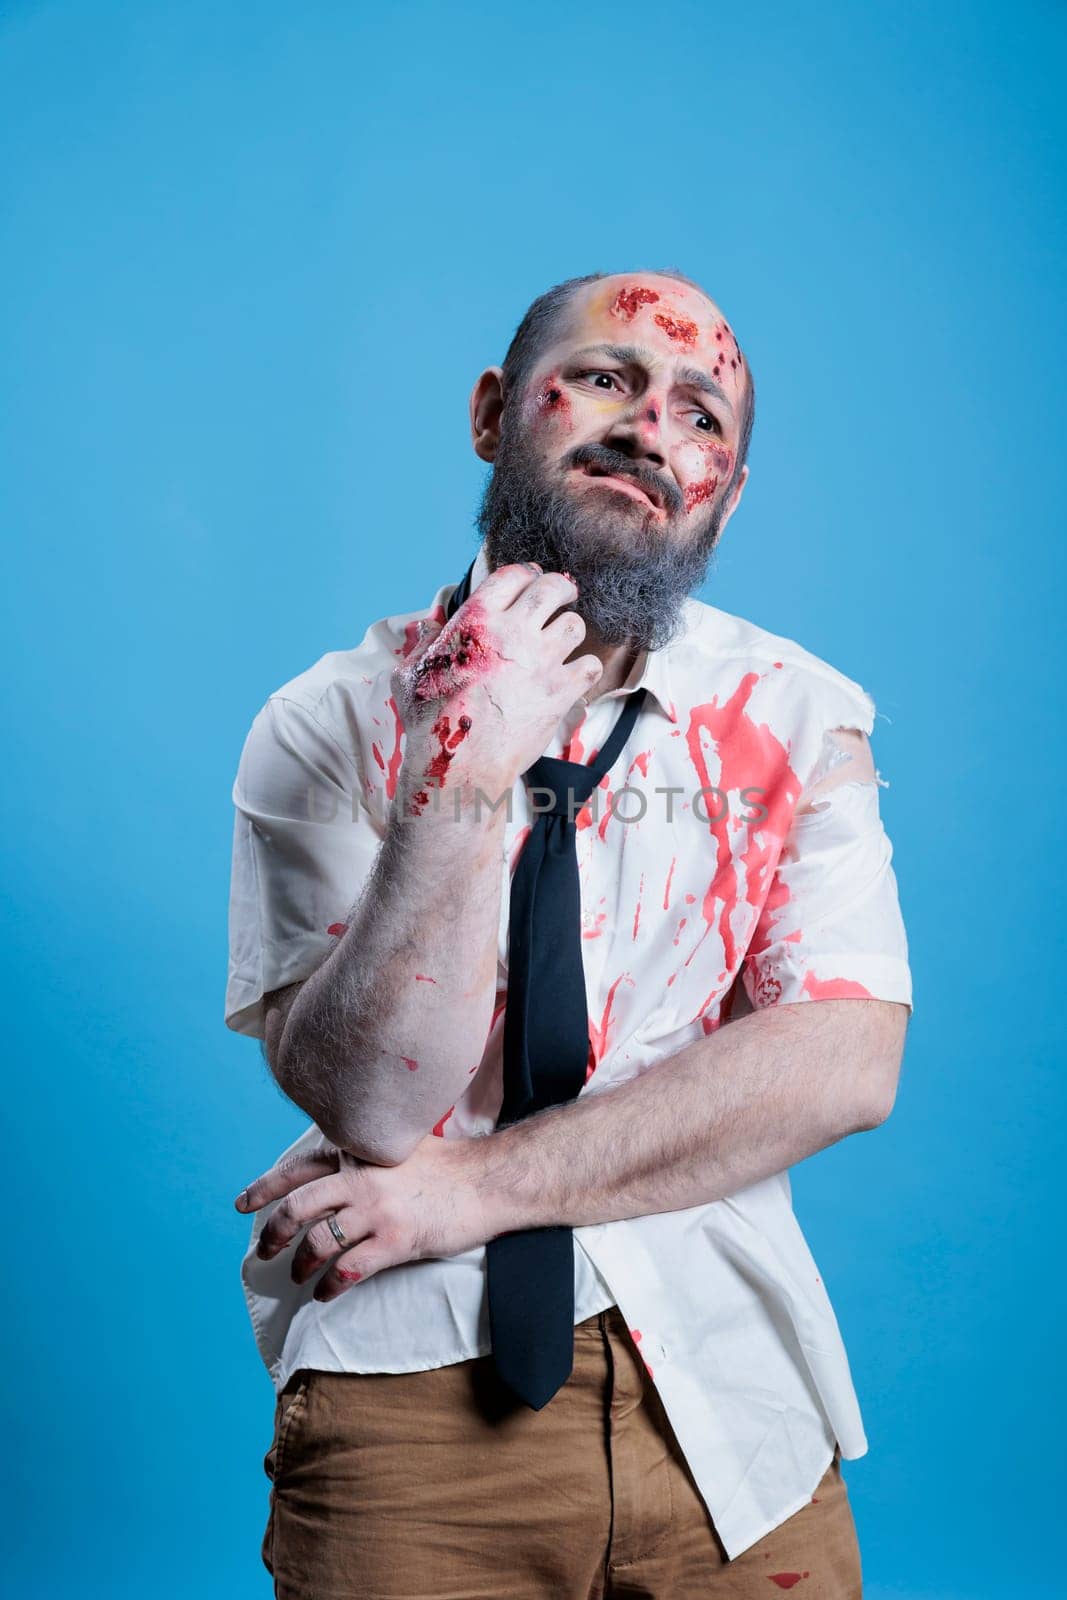 Portrait of man dressed as zombie wincing from pain for Halloween event, wearing horror makeup. Person costumed as infected diseased creature covered in blood and wounds, studio background